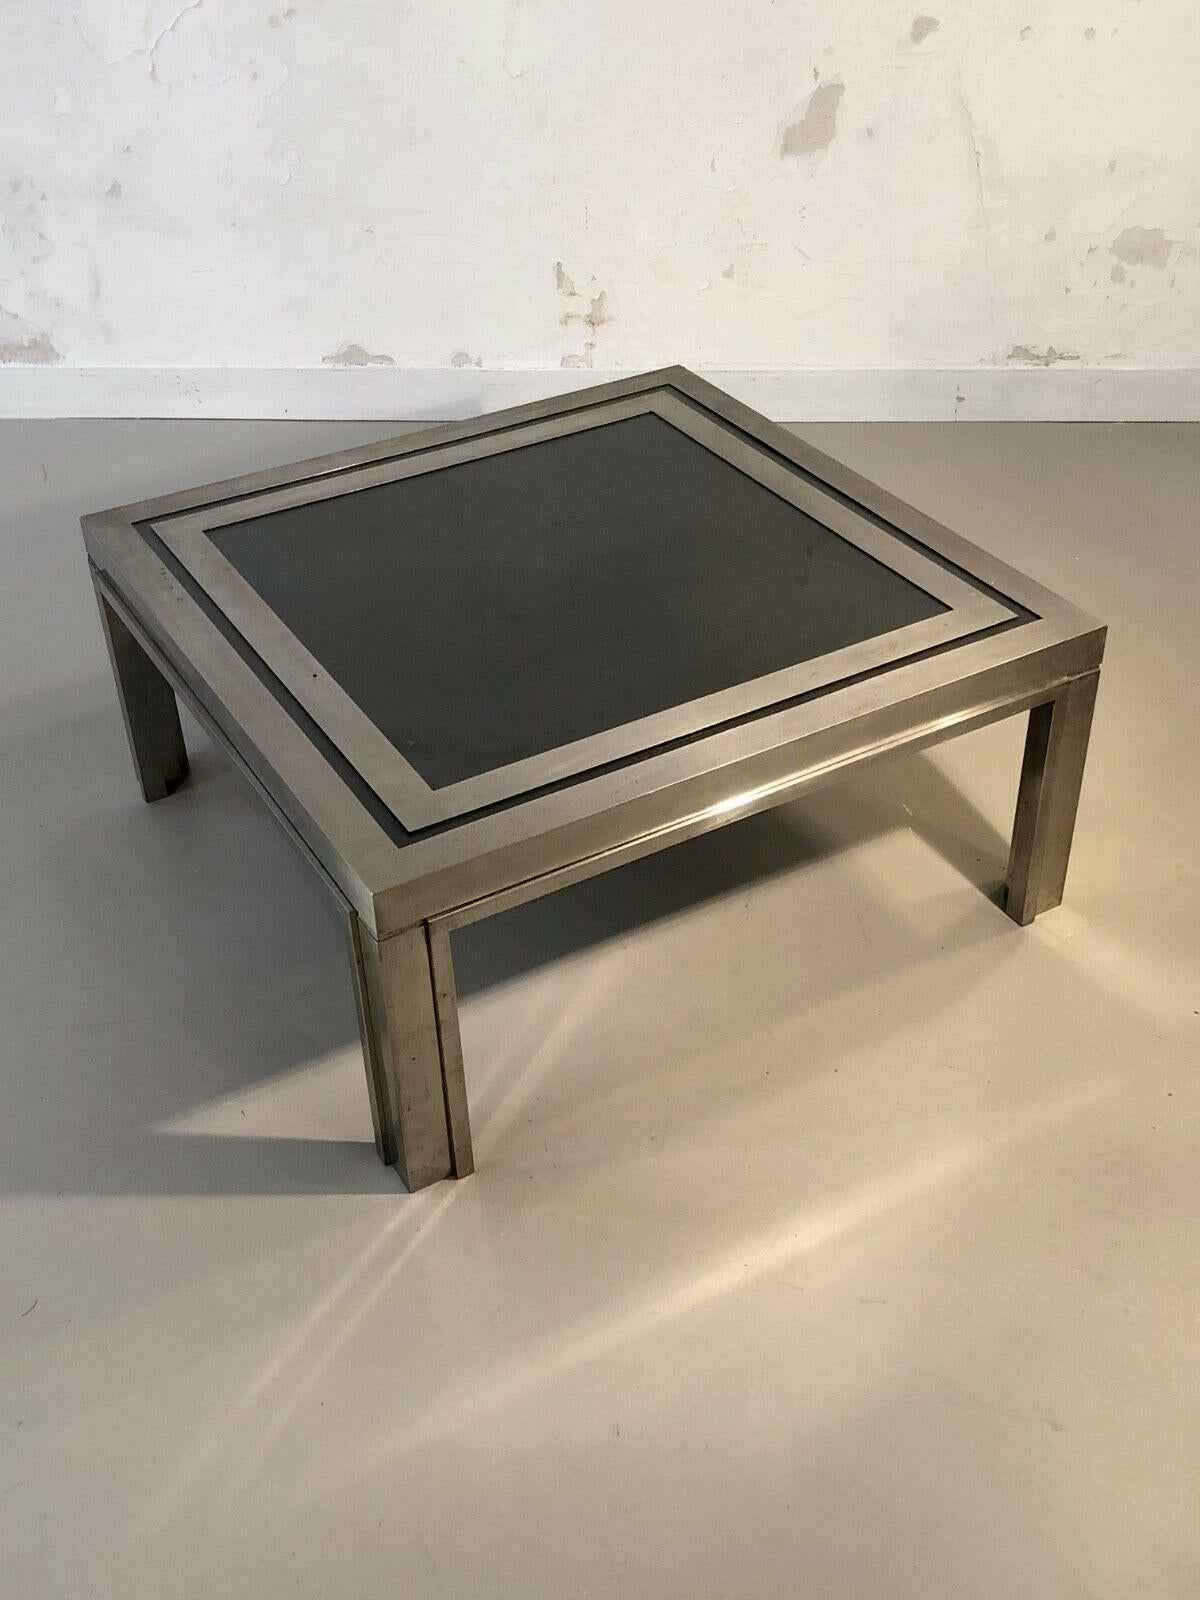 A Square RADICAL POSTMODERN COFFEE TABLE, by GIACOMO SINOPOLI, Italy 1970 For Sale 6